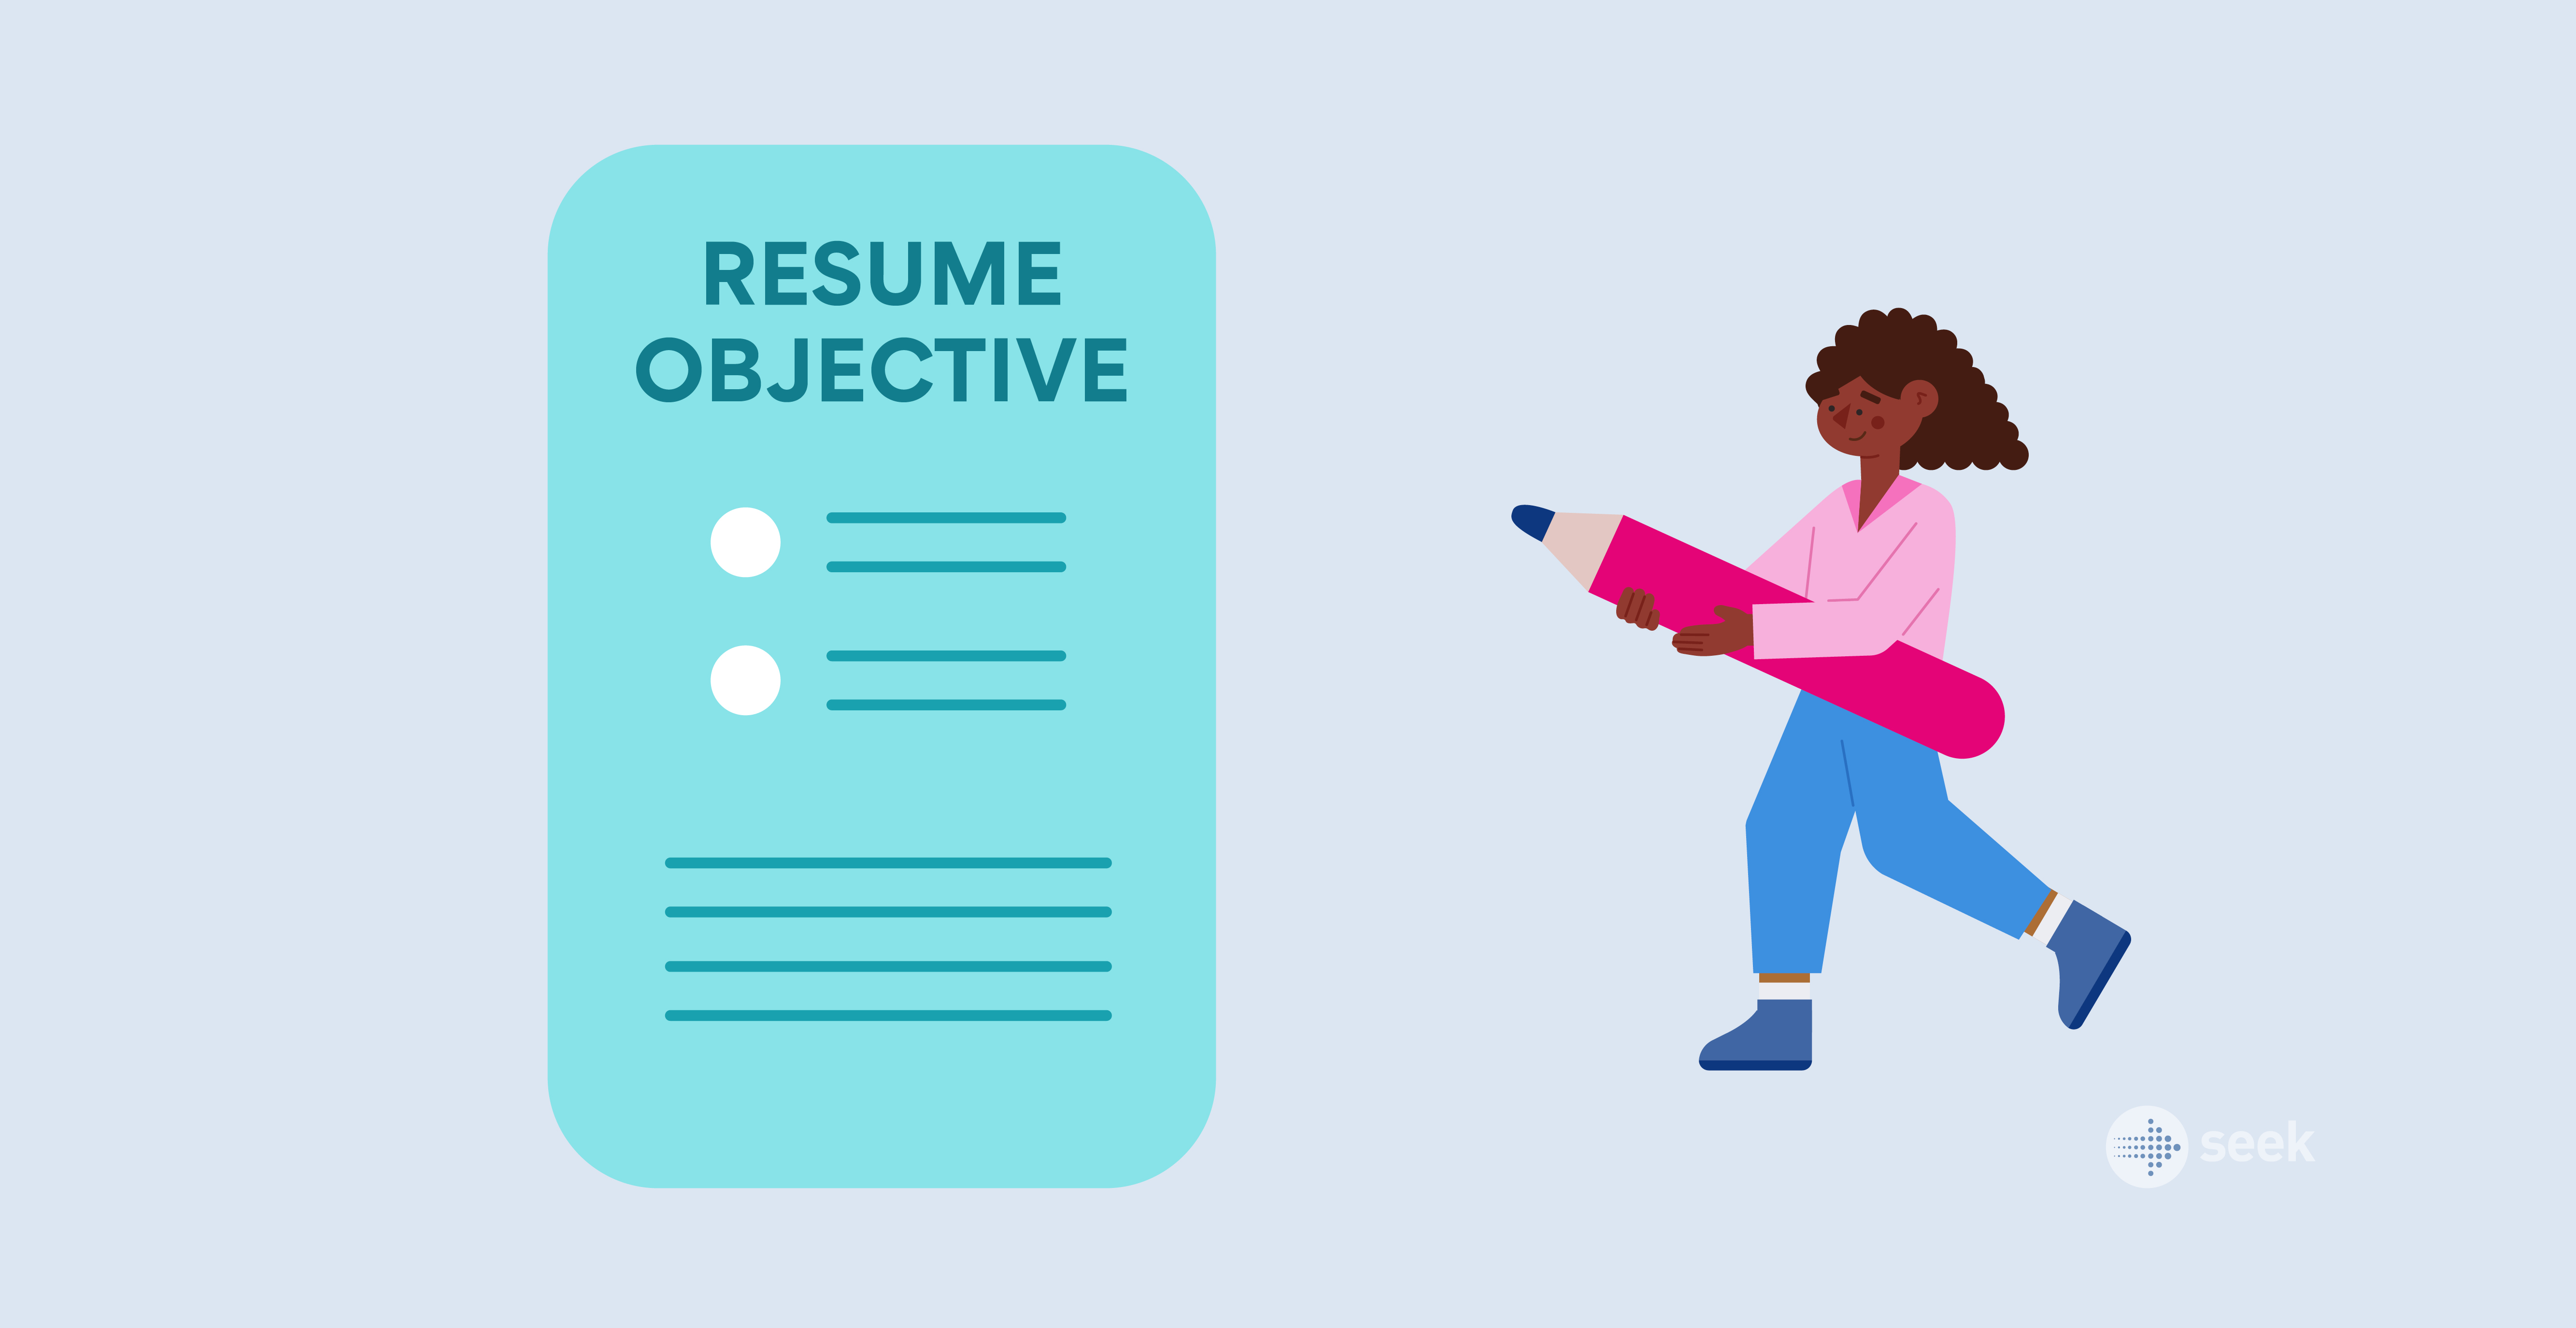 50+ examples of career objectives for your resumé